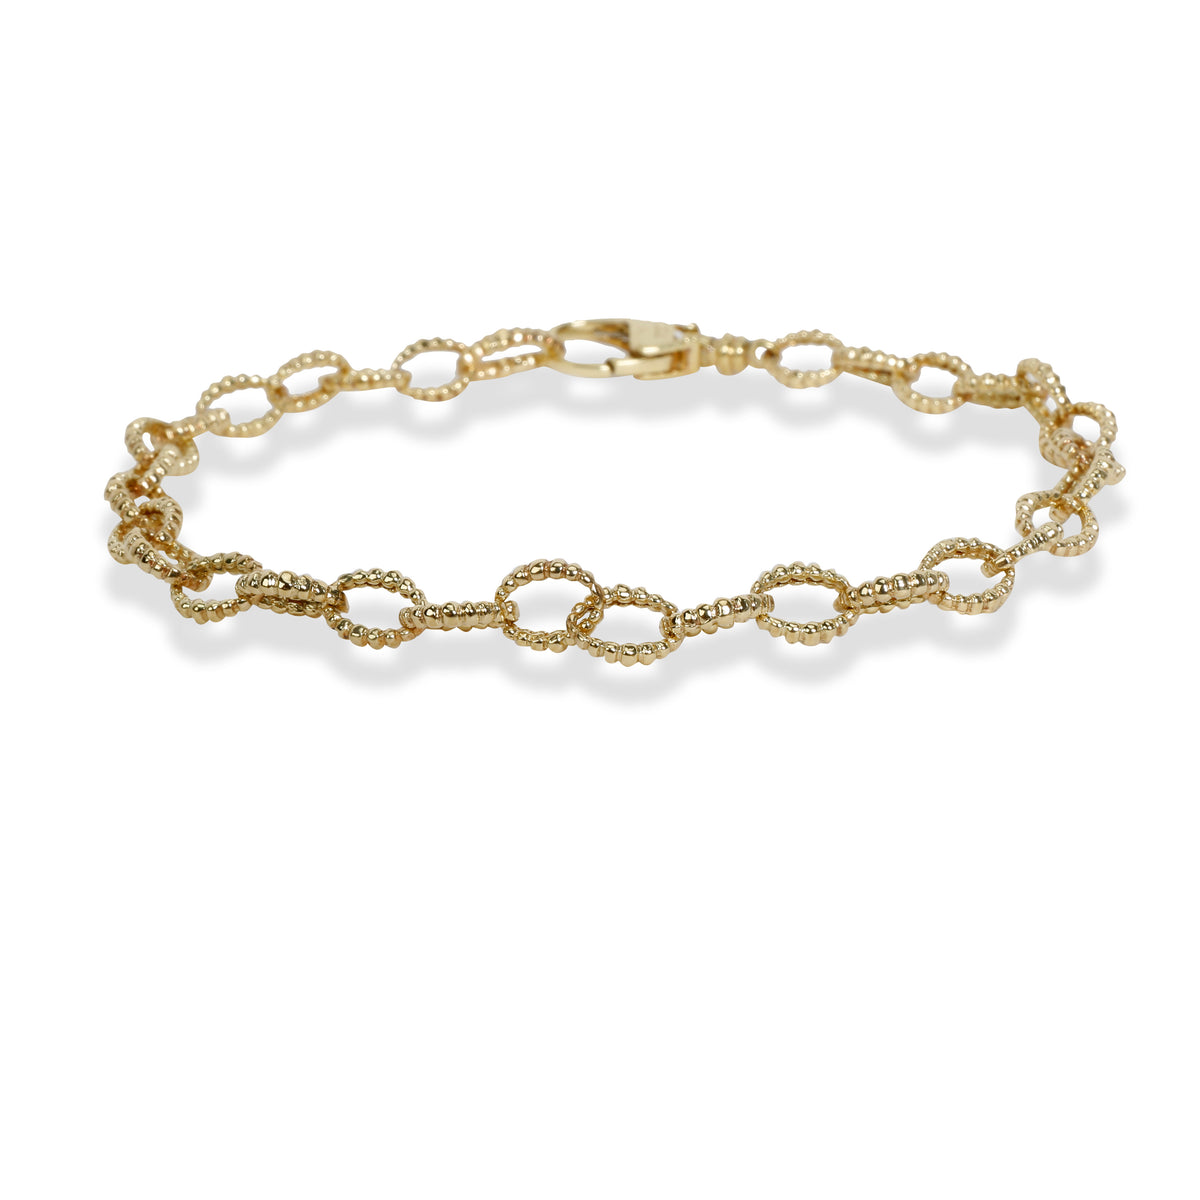 Lagos Caviar Collection Fluted Oval Link Bracelet in 18K Yellow Gold